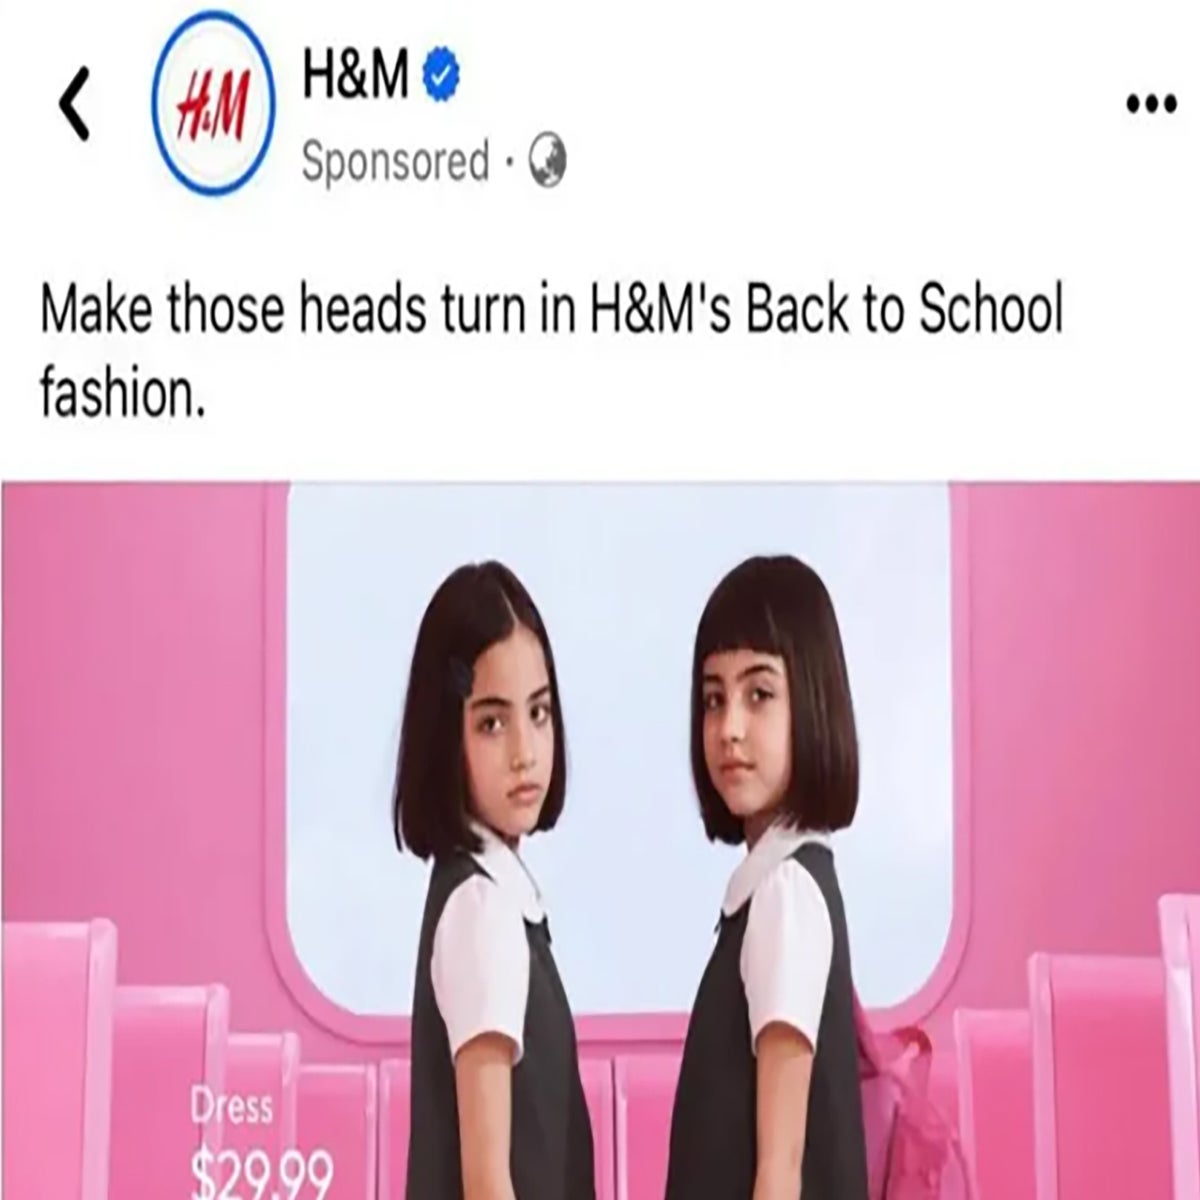 H&M apologises and pulls advert over claims it 'sexualised